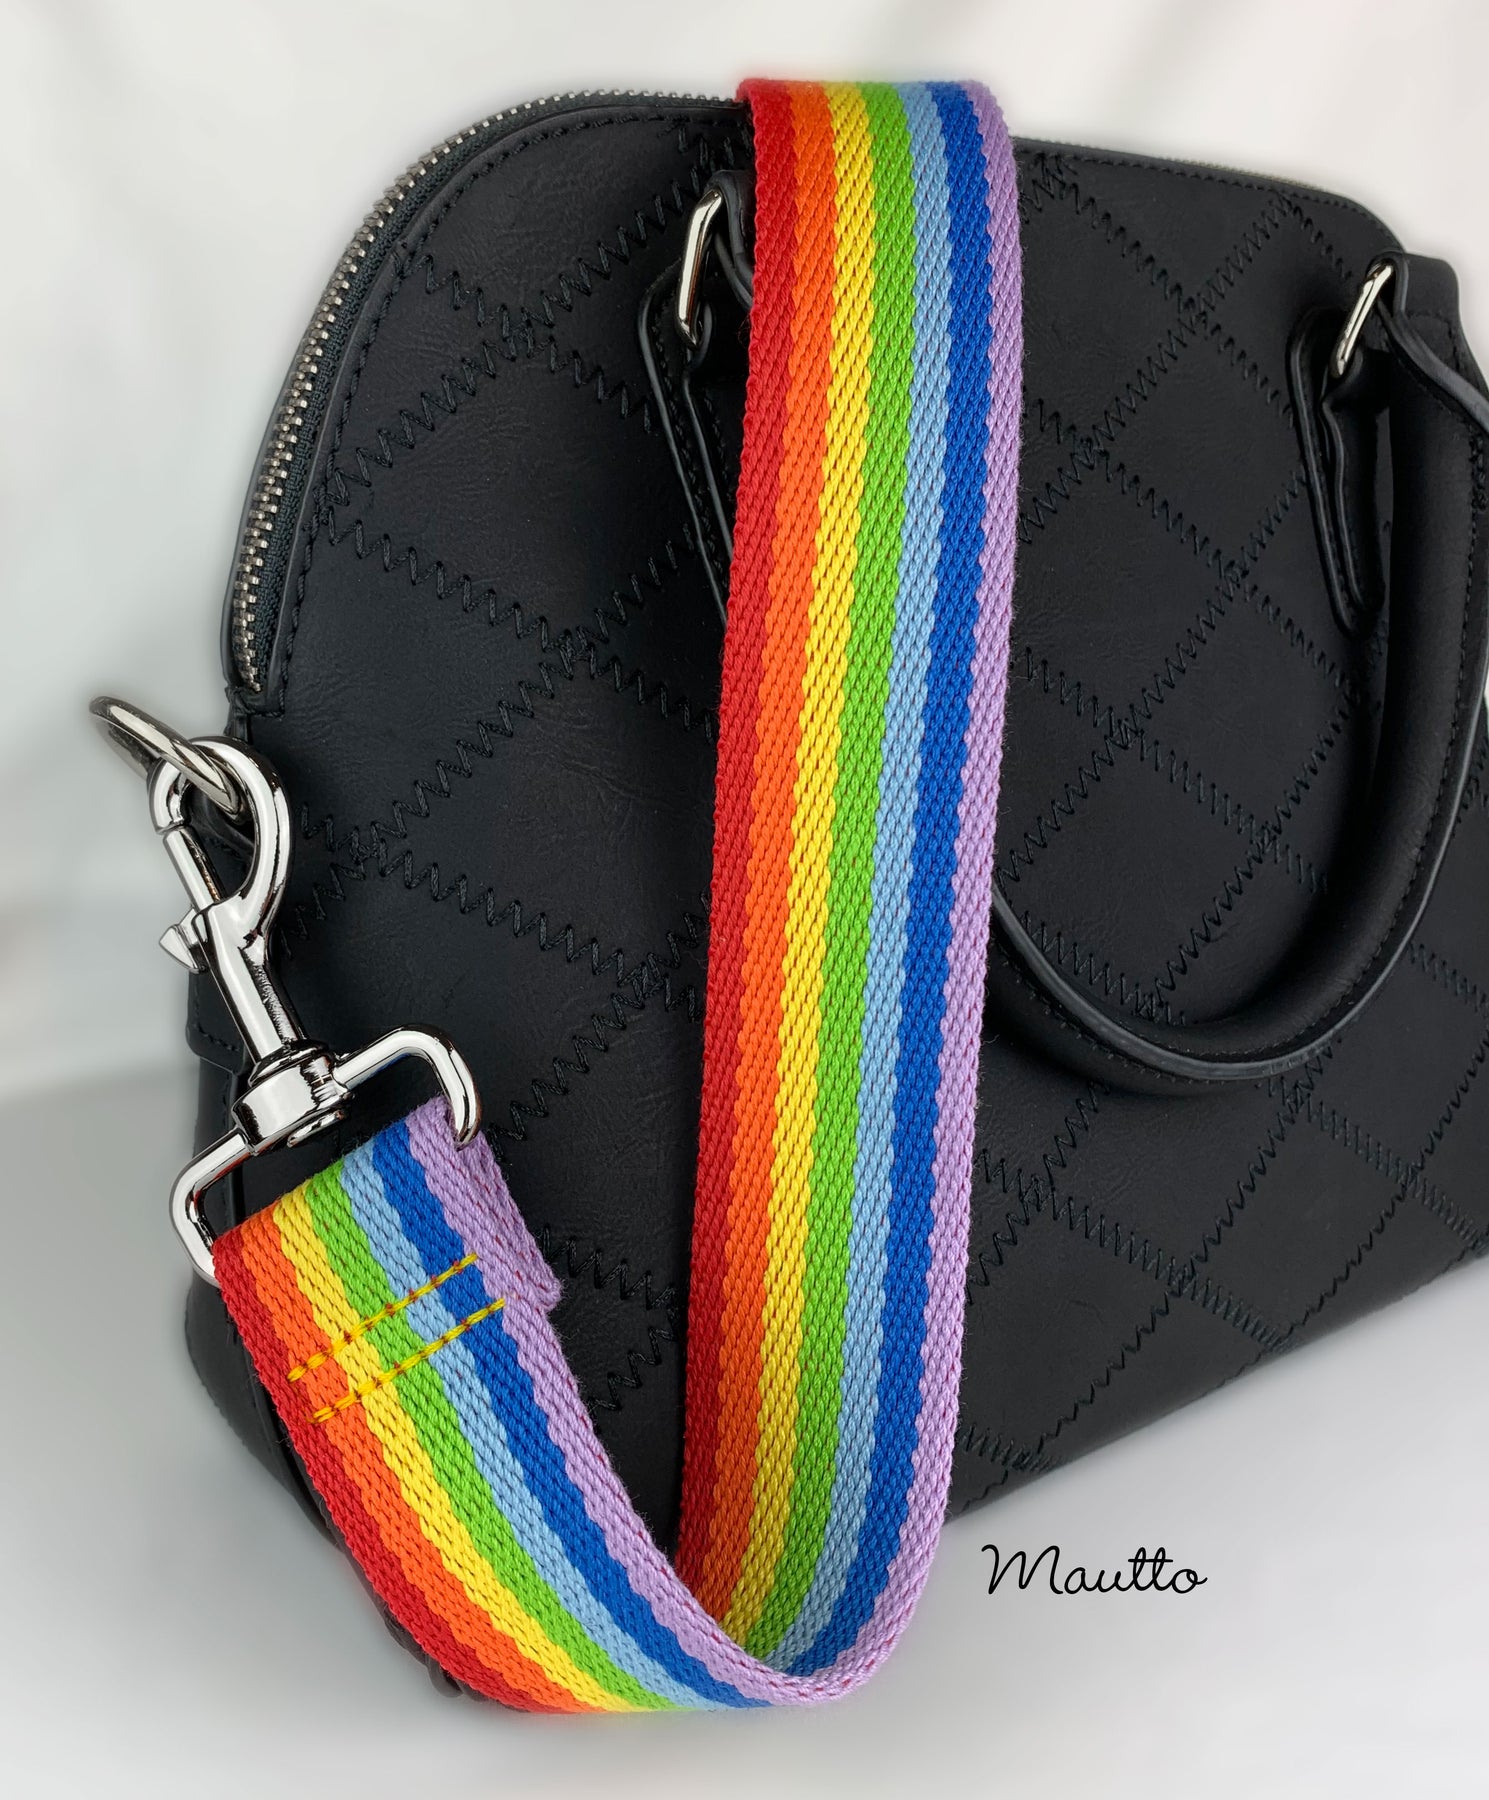 Colorful Rainbow Pattern Strap - Adjustable Shoulder to Crossbody